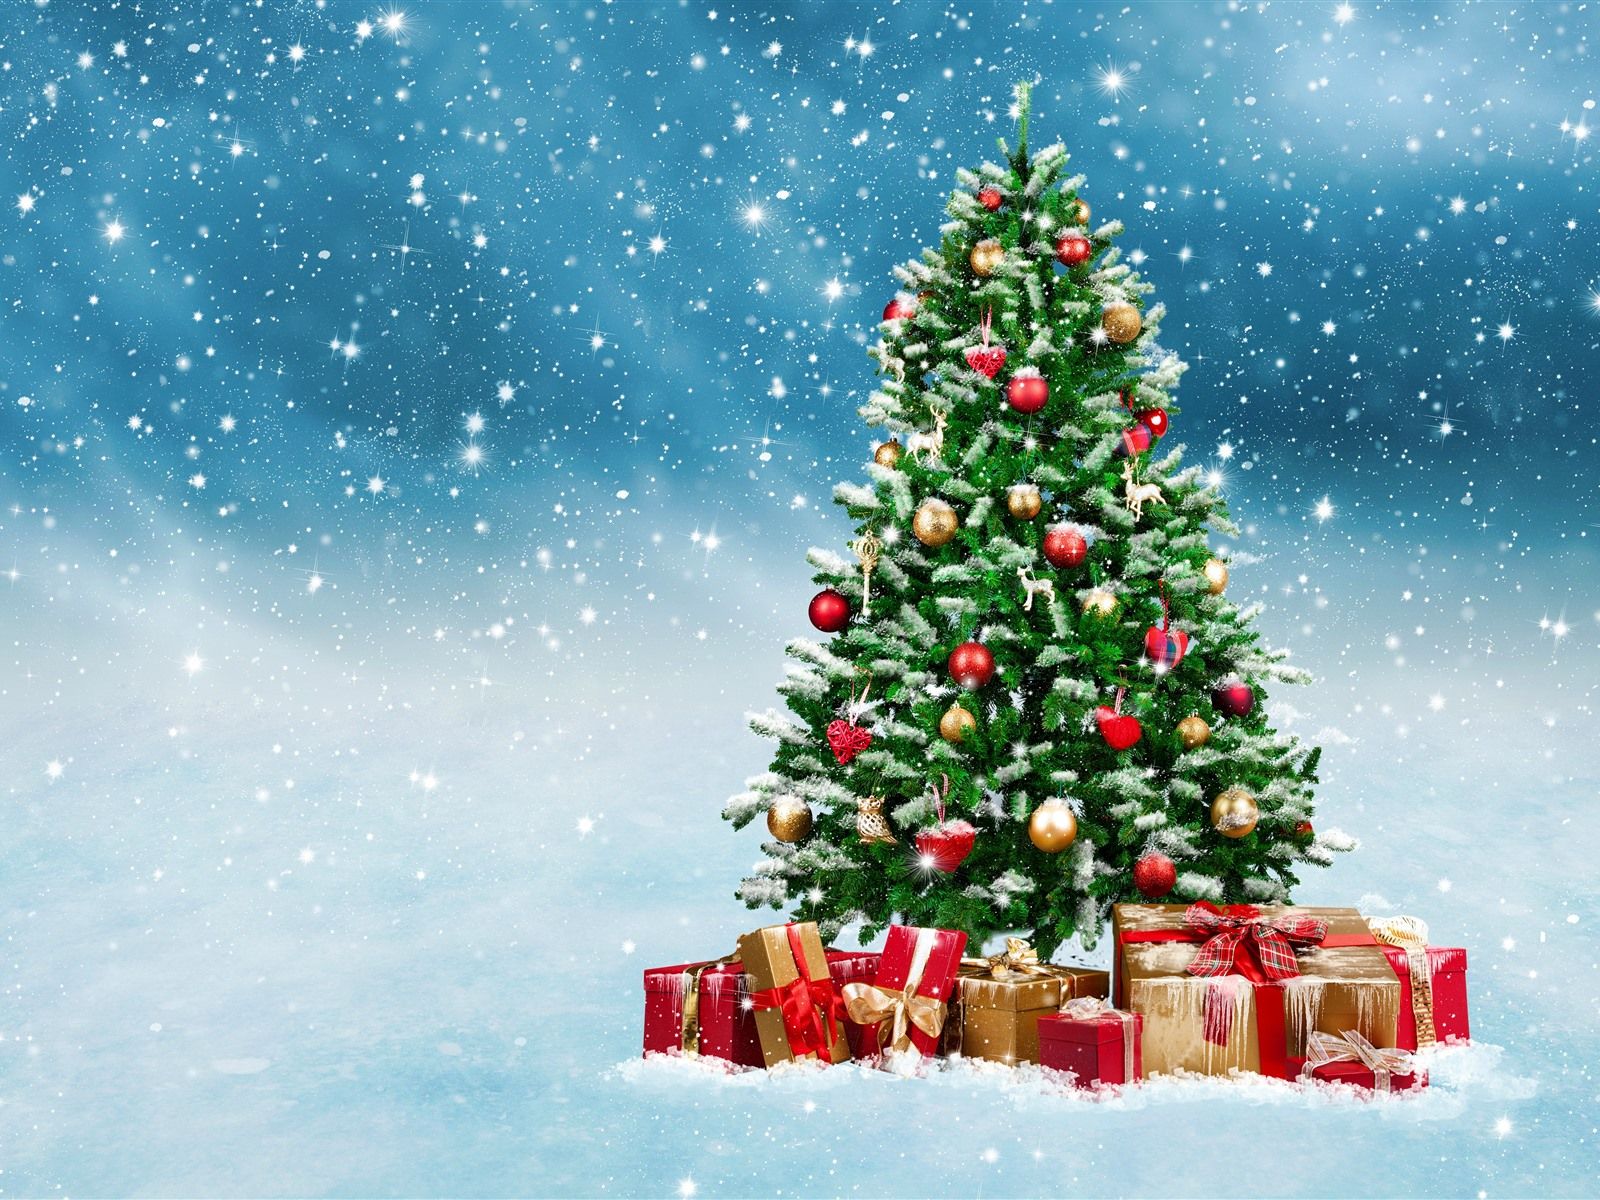 Christmas Tree And Gifts Wallpapers - Wallpaper Cave